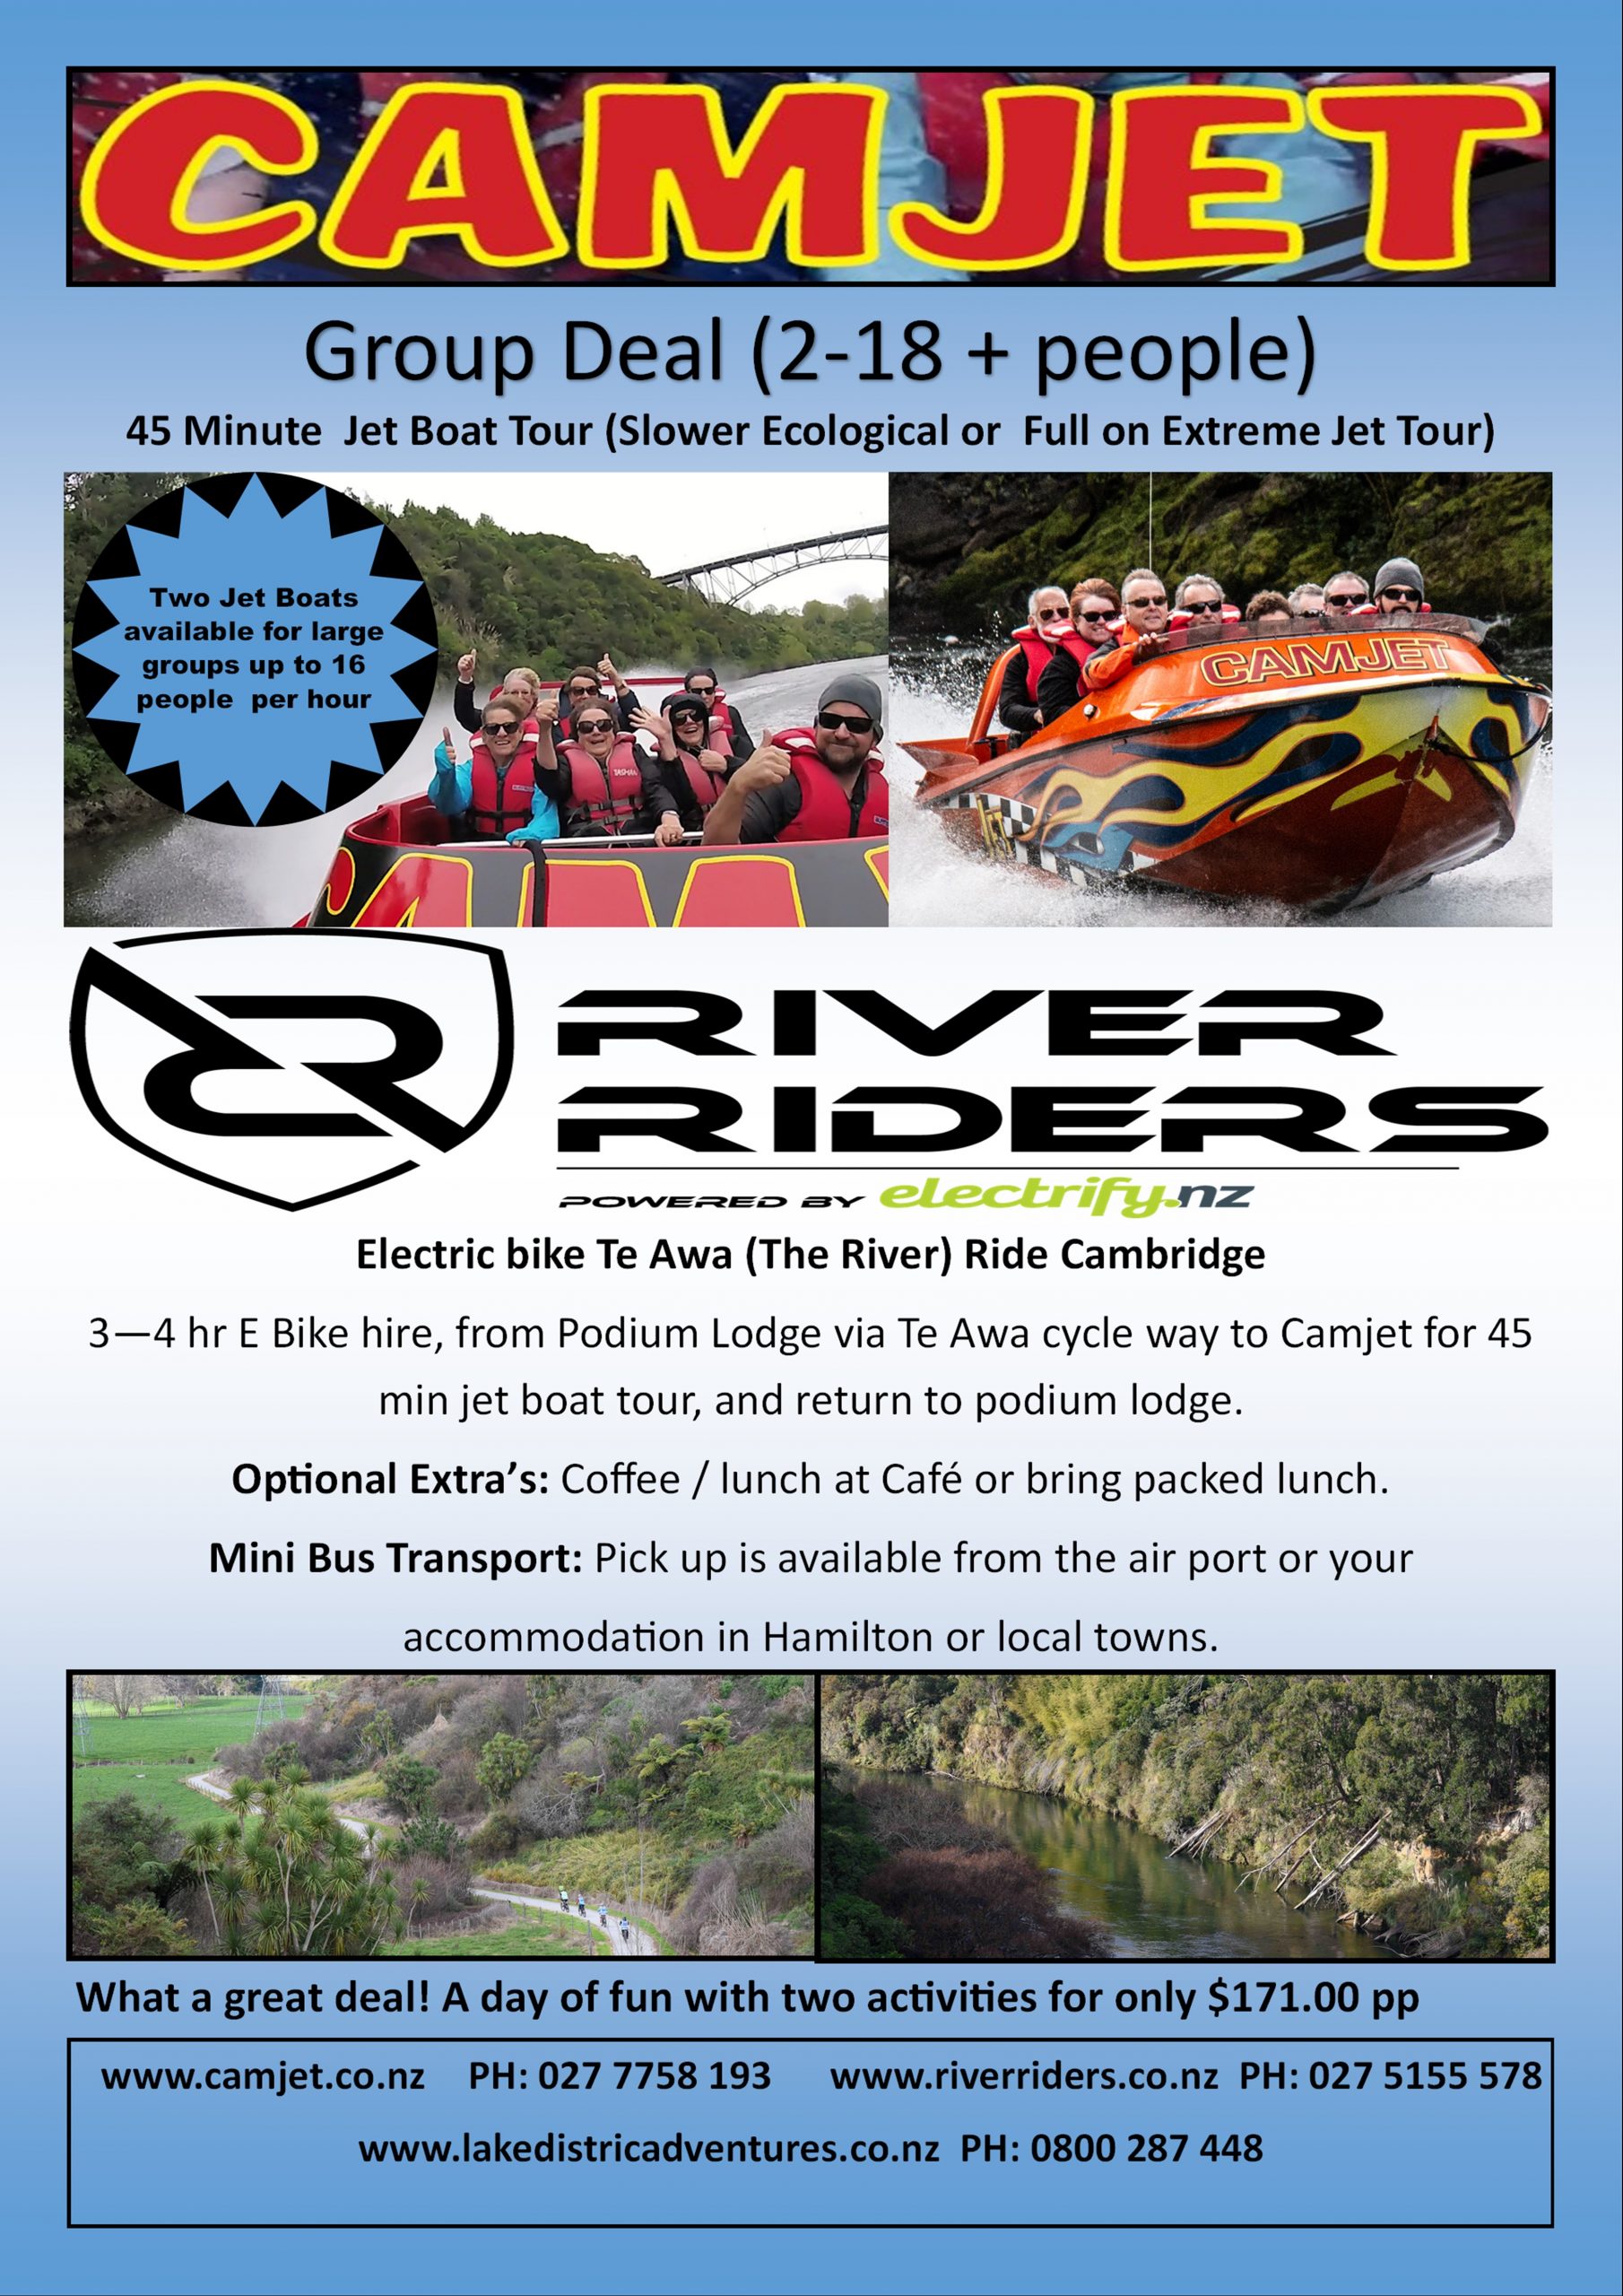 Things to do in cambridge jet boat and e bike combo $171 per person